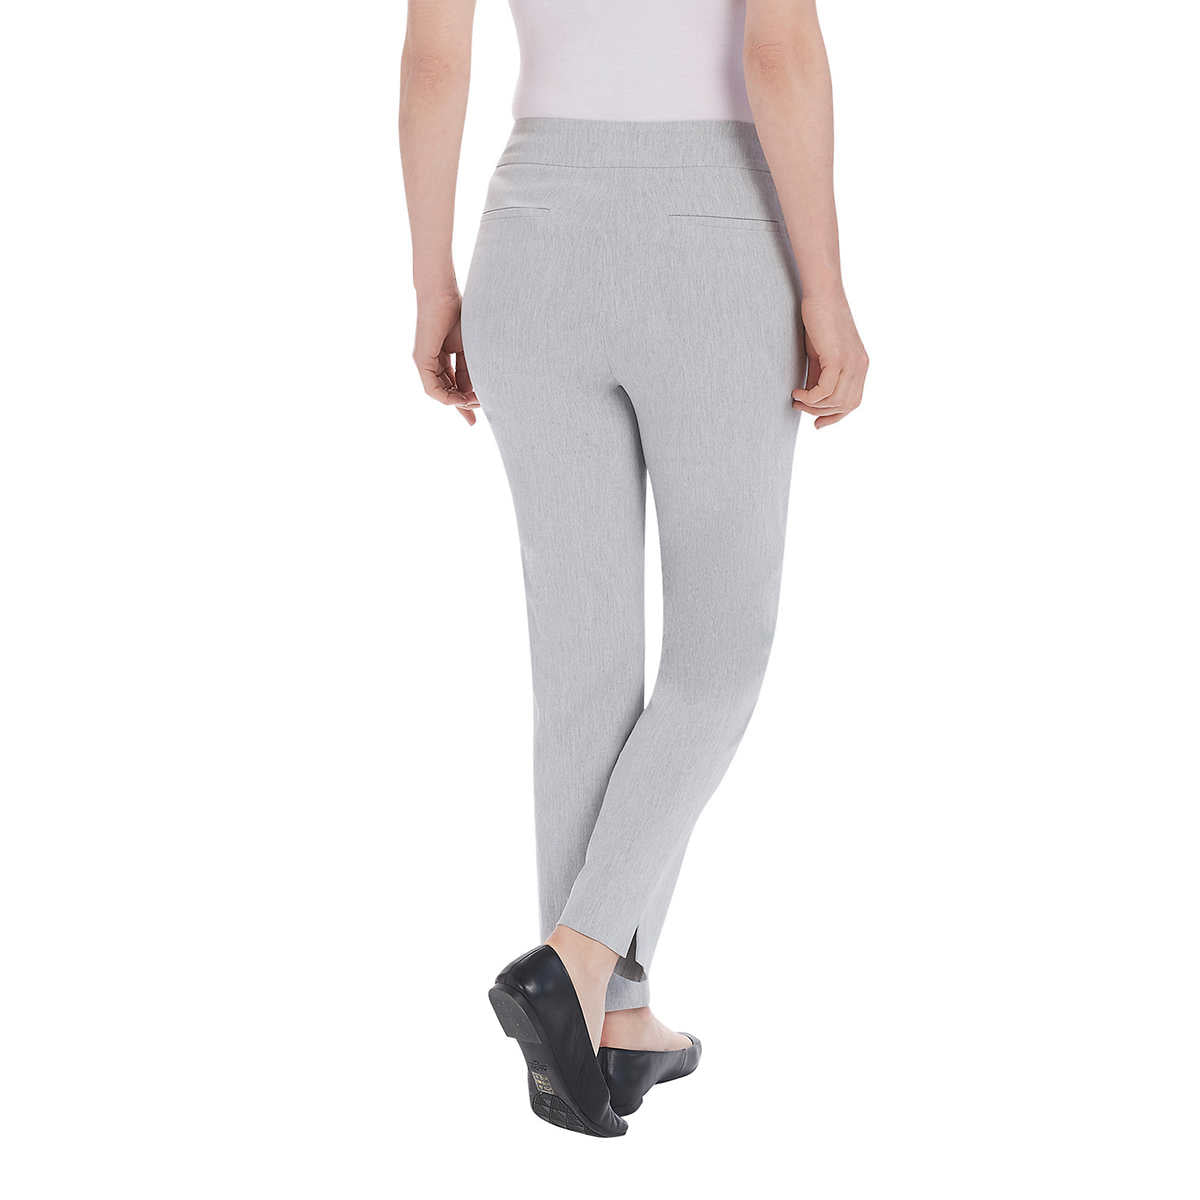 Hilary Radley Ladies' Pull-On Pant with Pockets